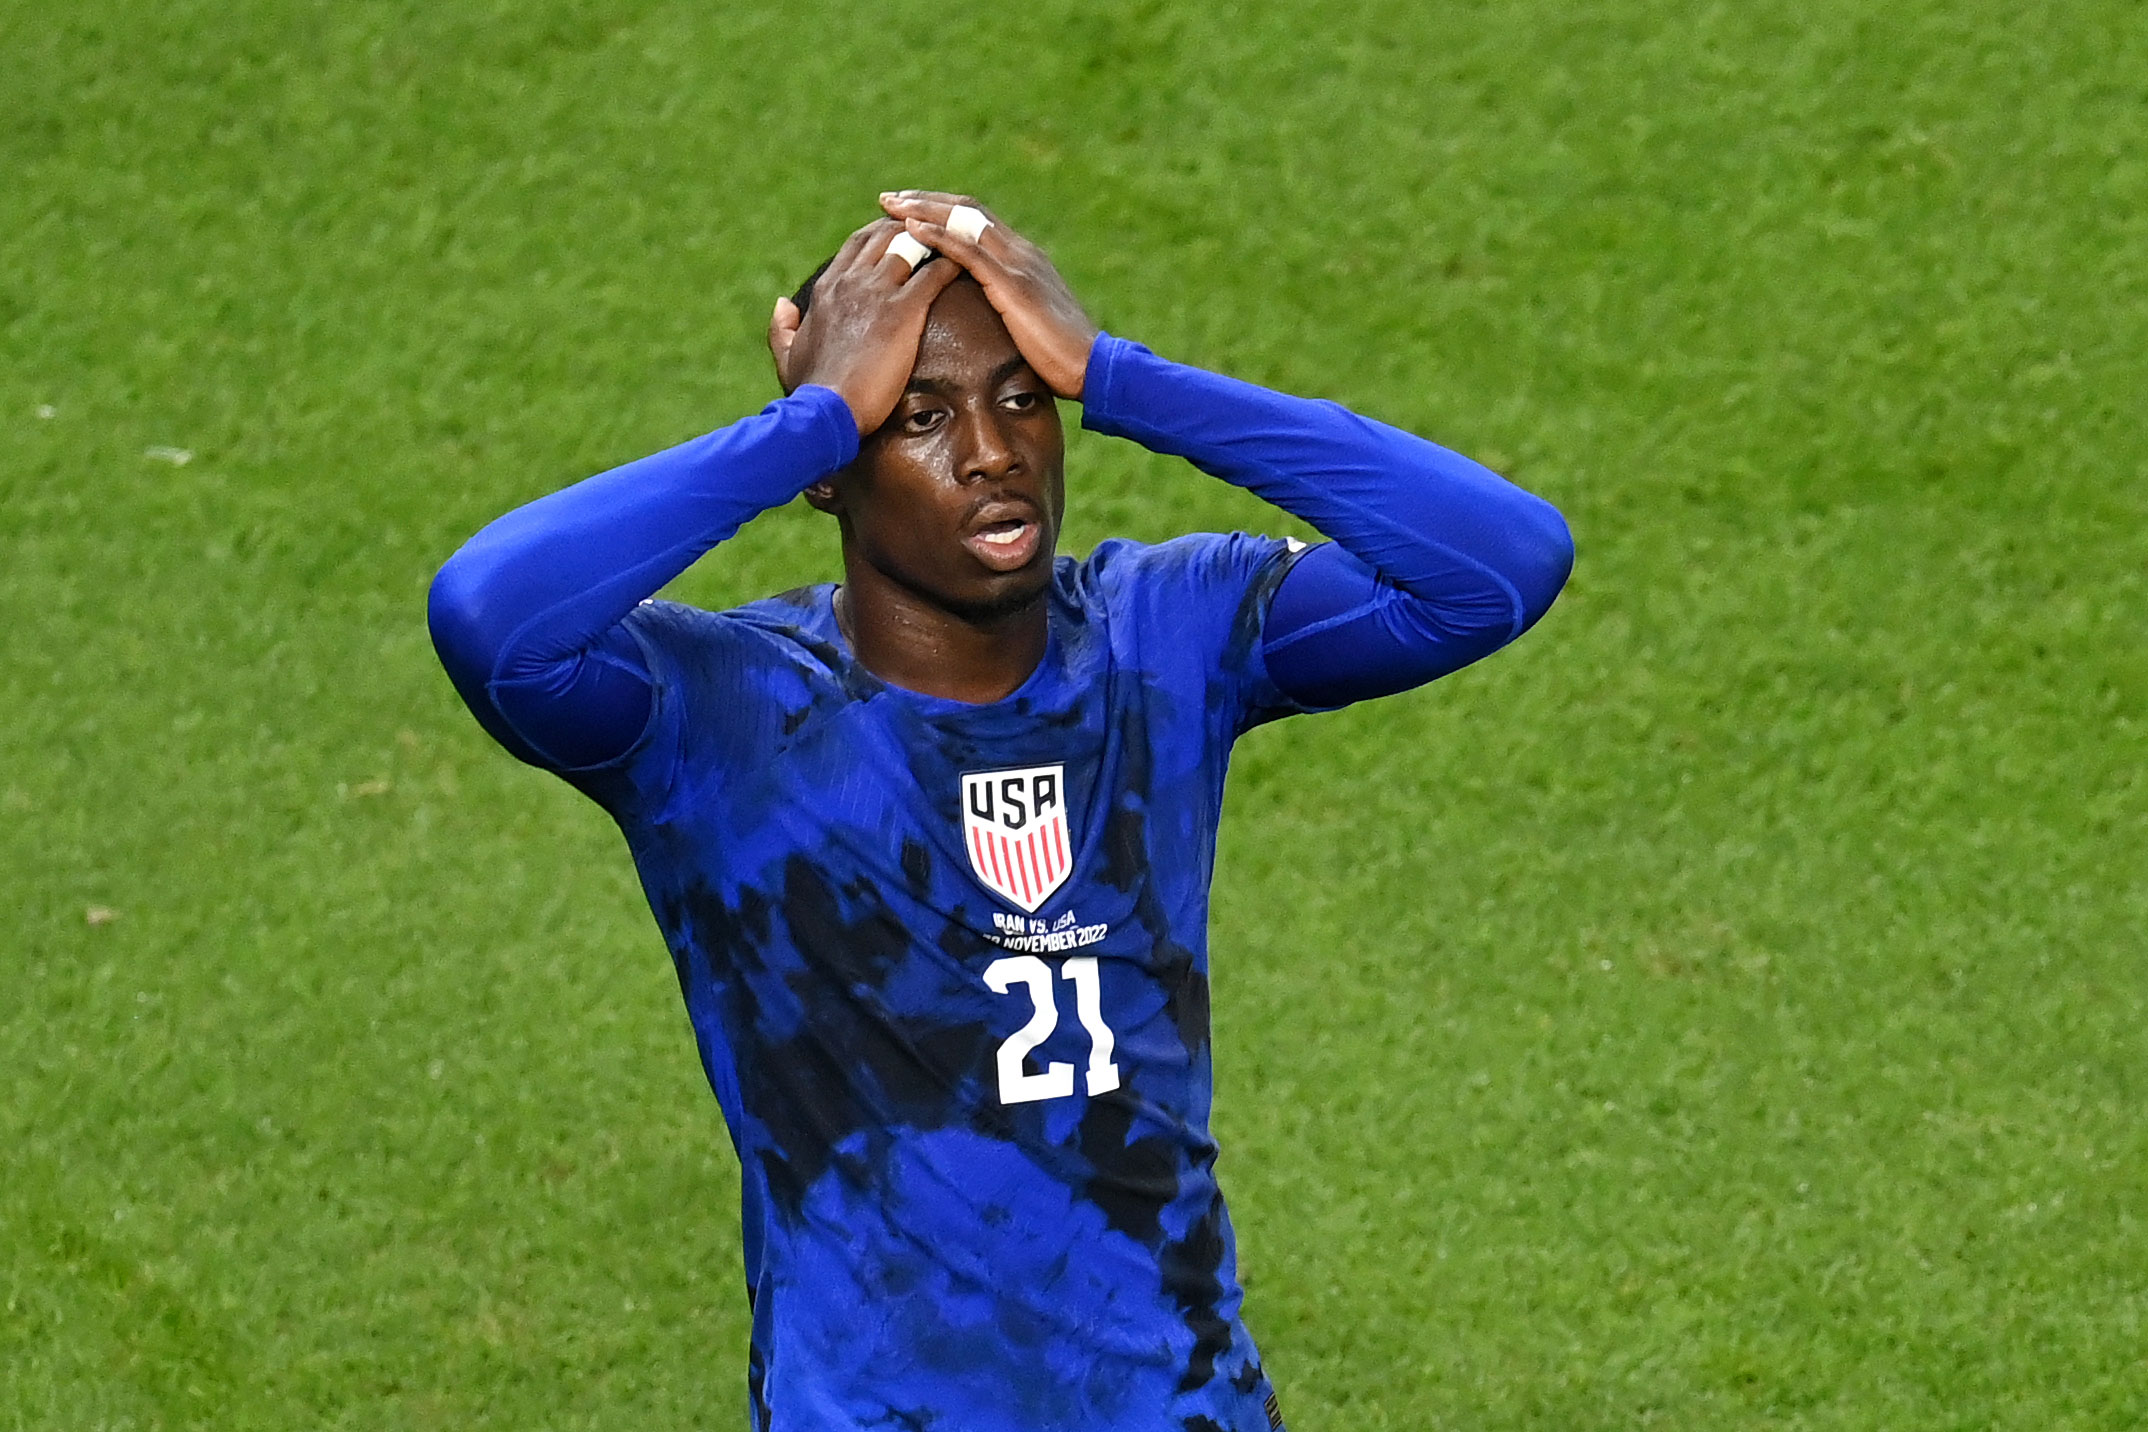 Juventus are close to landing Timothy Weah, who will likely be the first piece of their revamped right wing. They and Lille concurred on the fee.